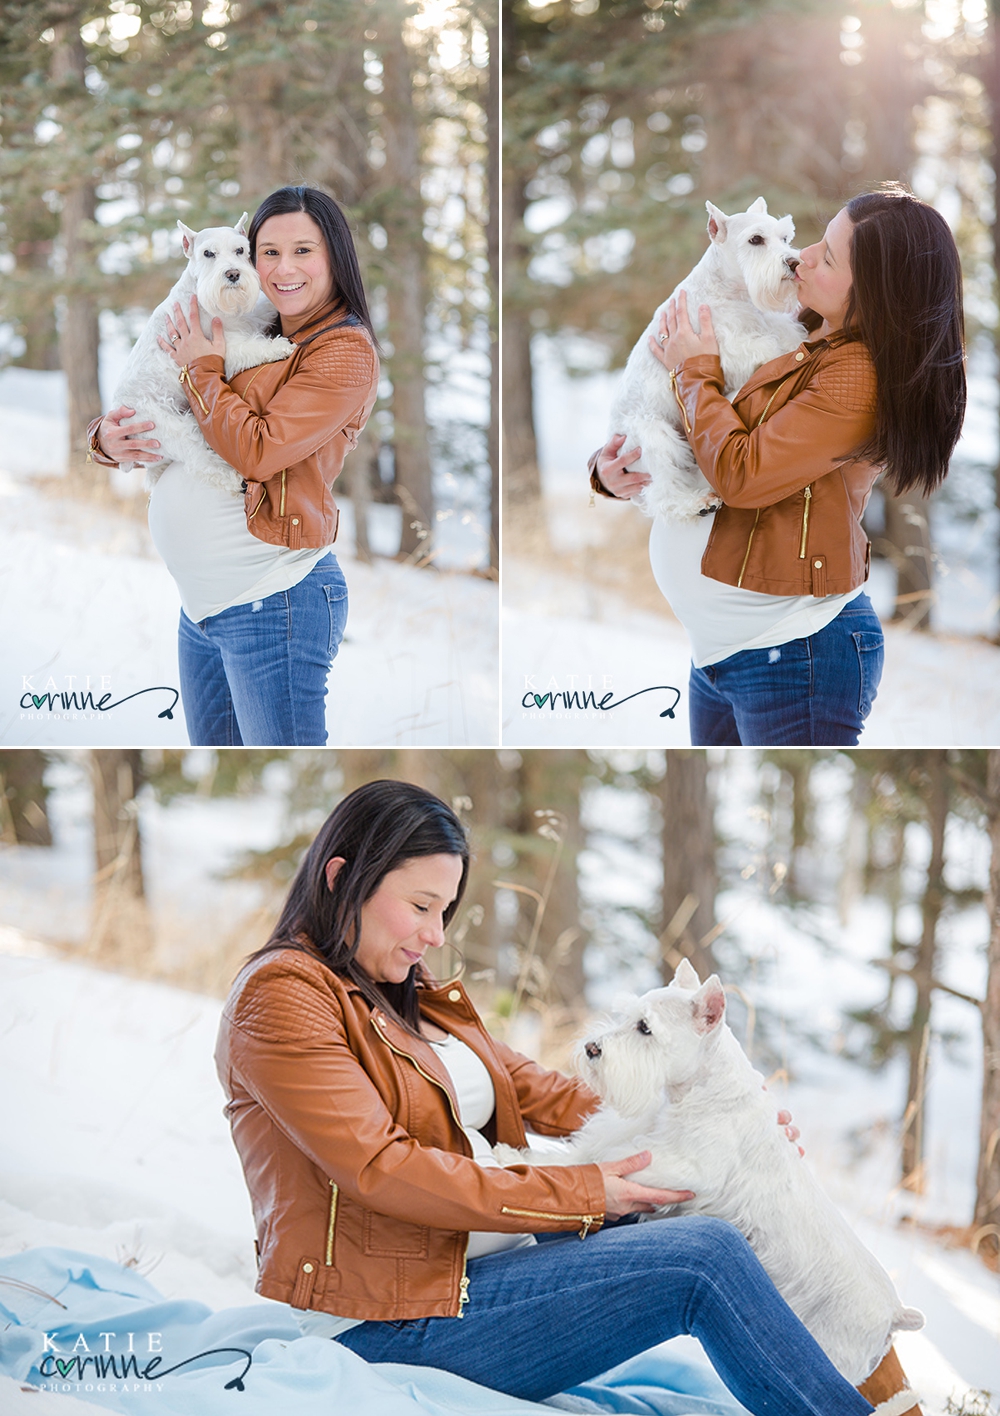 Pregnant maternity photos with dog, dog with mom during maternity photos, furbaby maternity photos, belly photos, bump photos, baby bump maternity photos,